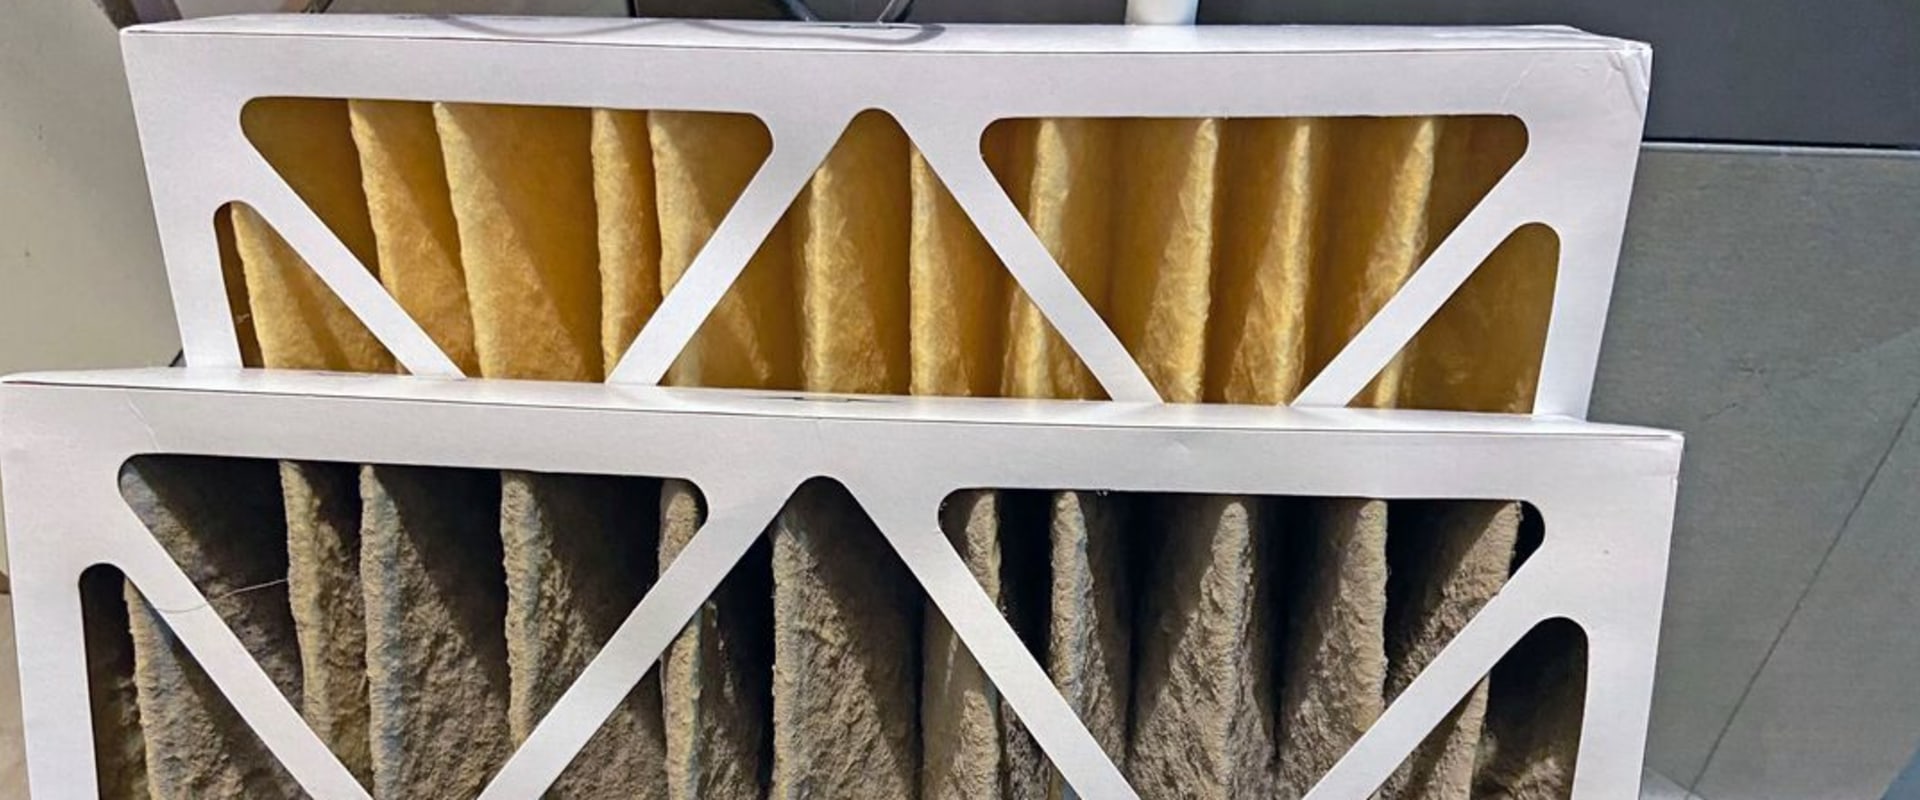 How often do you need to change furnace filter?